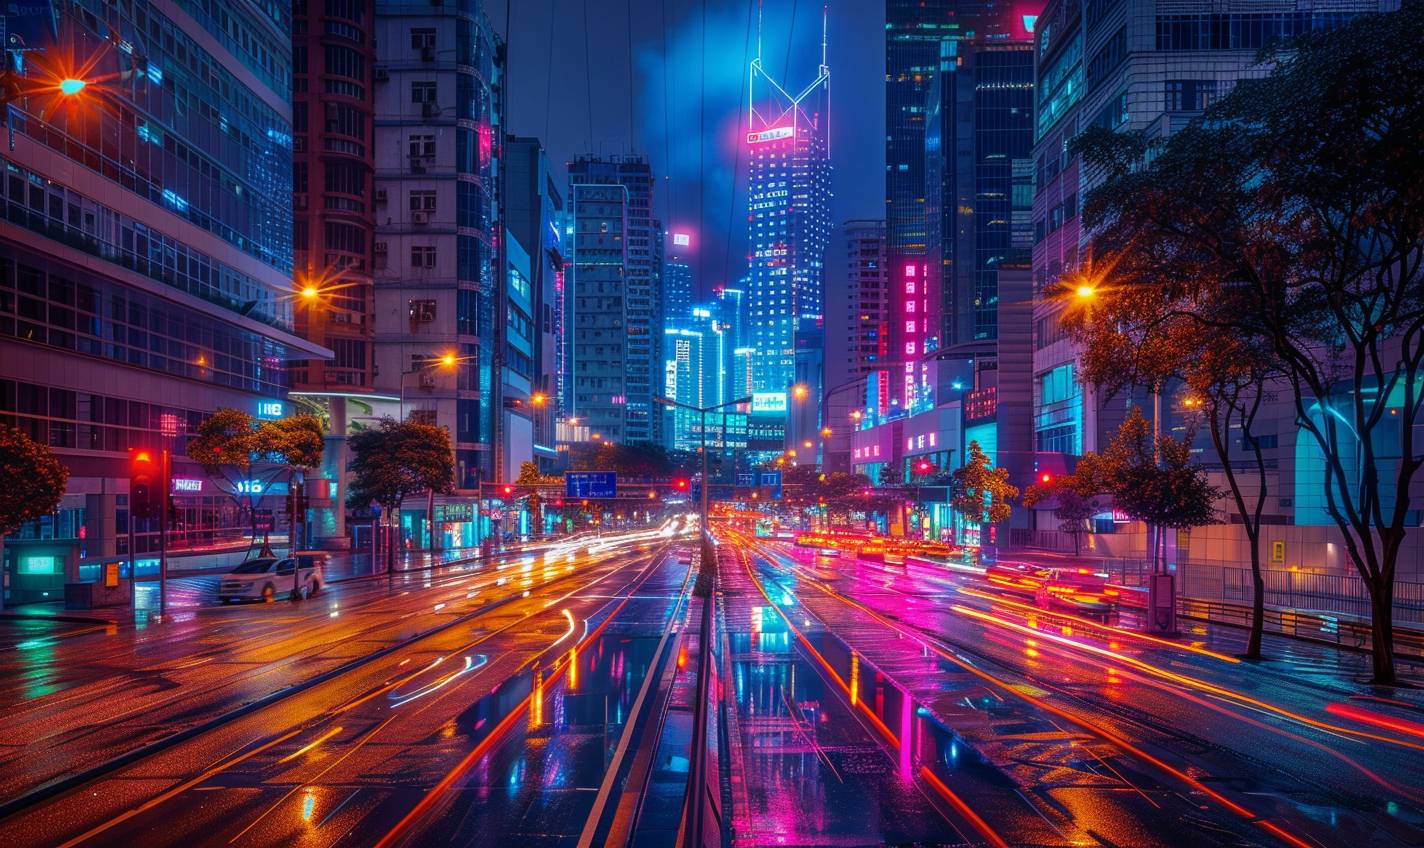 Bustling city, neon lights, dreamlike glow, skyscrapers, high detail streets, soft surreal shadows, vibrant colors, urban exploration, reflective surfaces, Orton effect, Sony a7R IV, Meike 85mm F1.8, UHD image